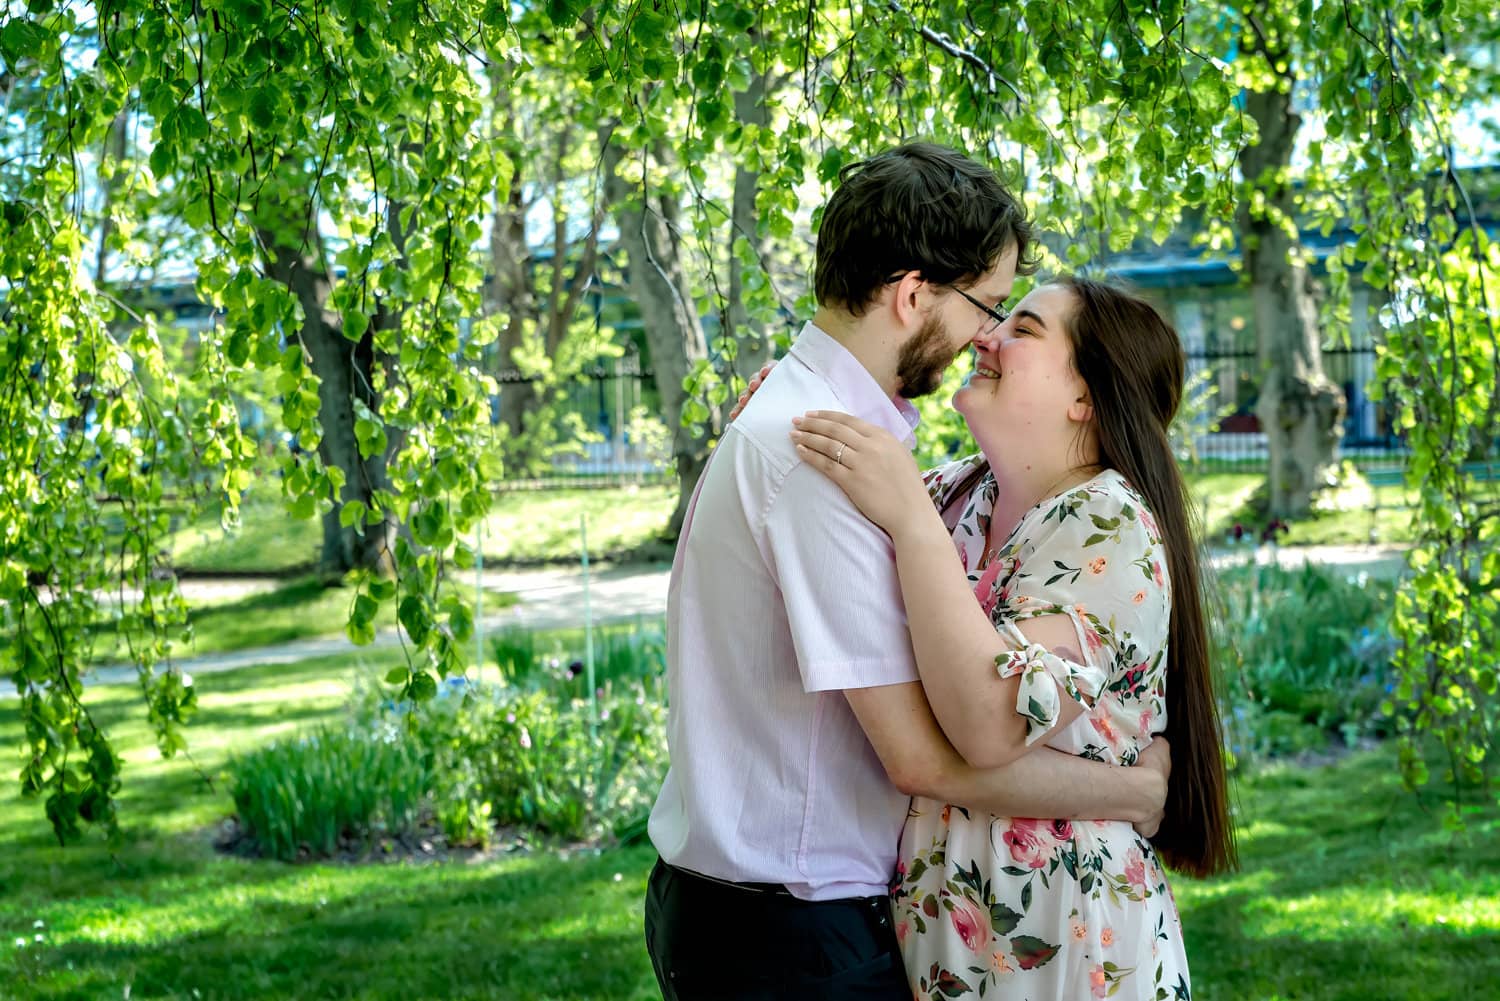 A boyfriend surprises his girlfriend with a proposal of marriage at the Halifax Public Gardens in Nova Scotia.